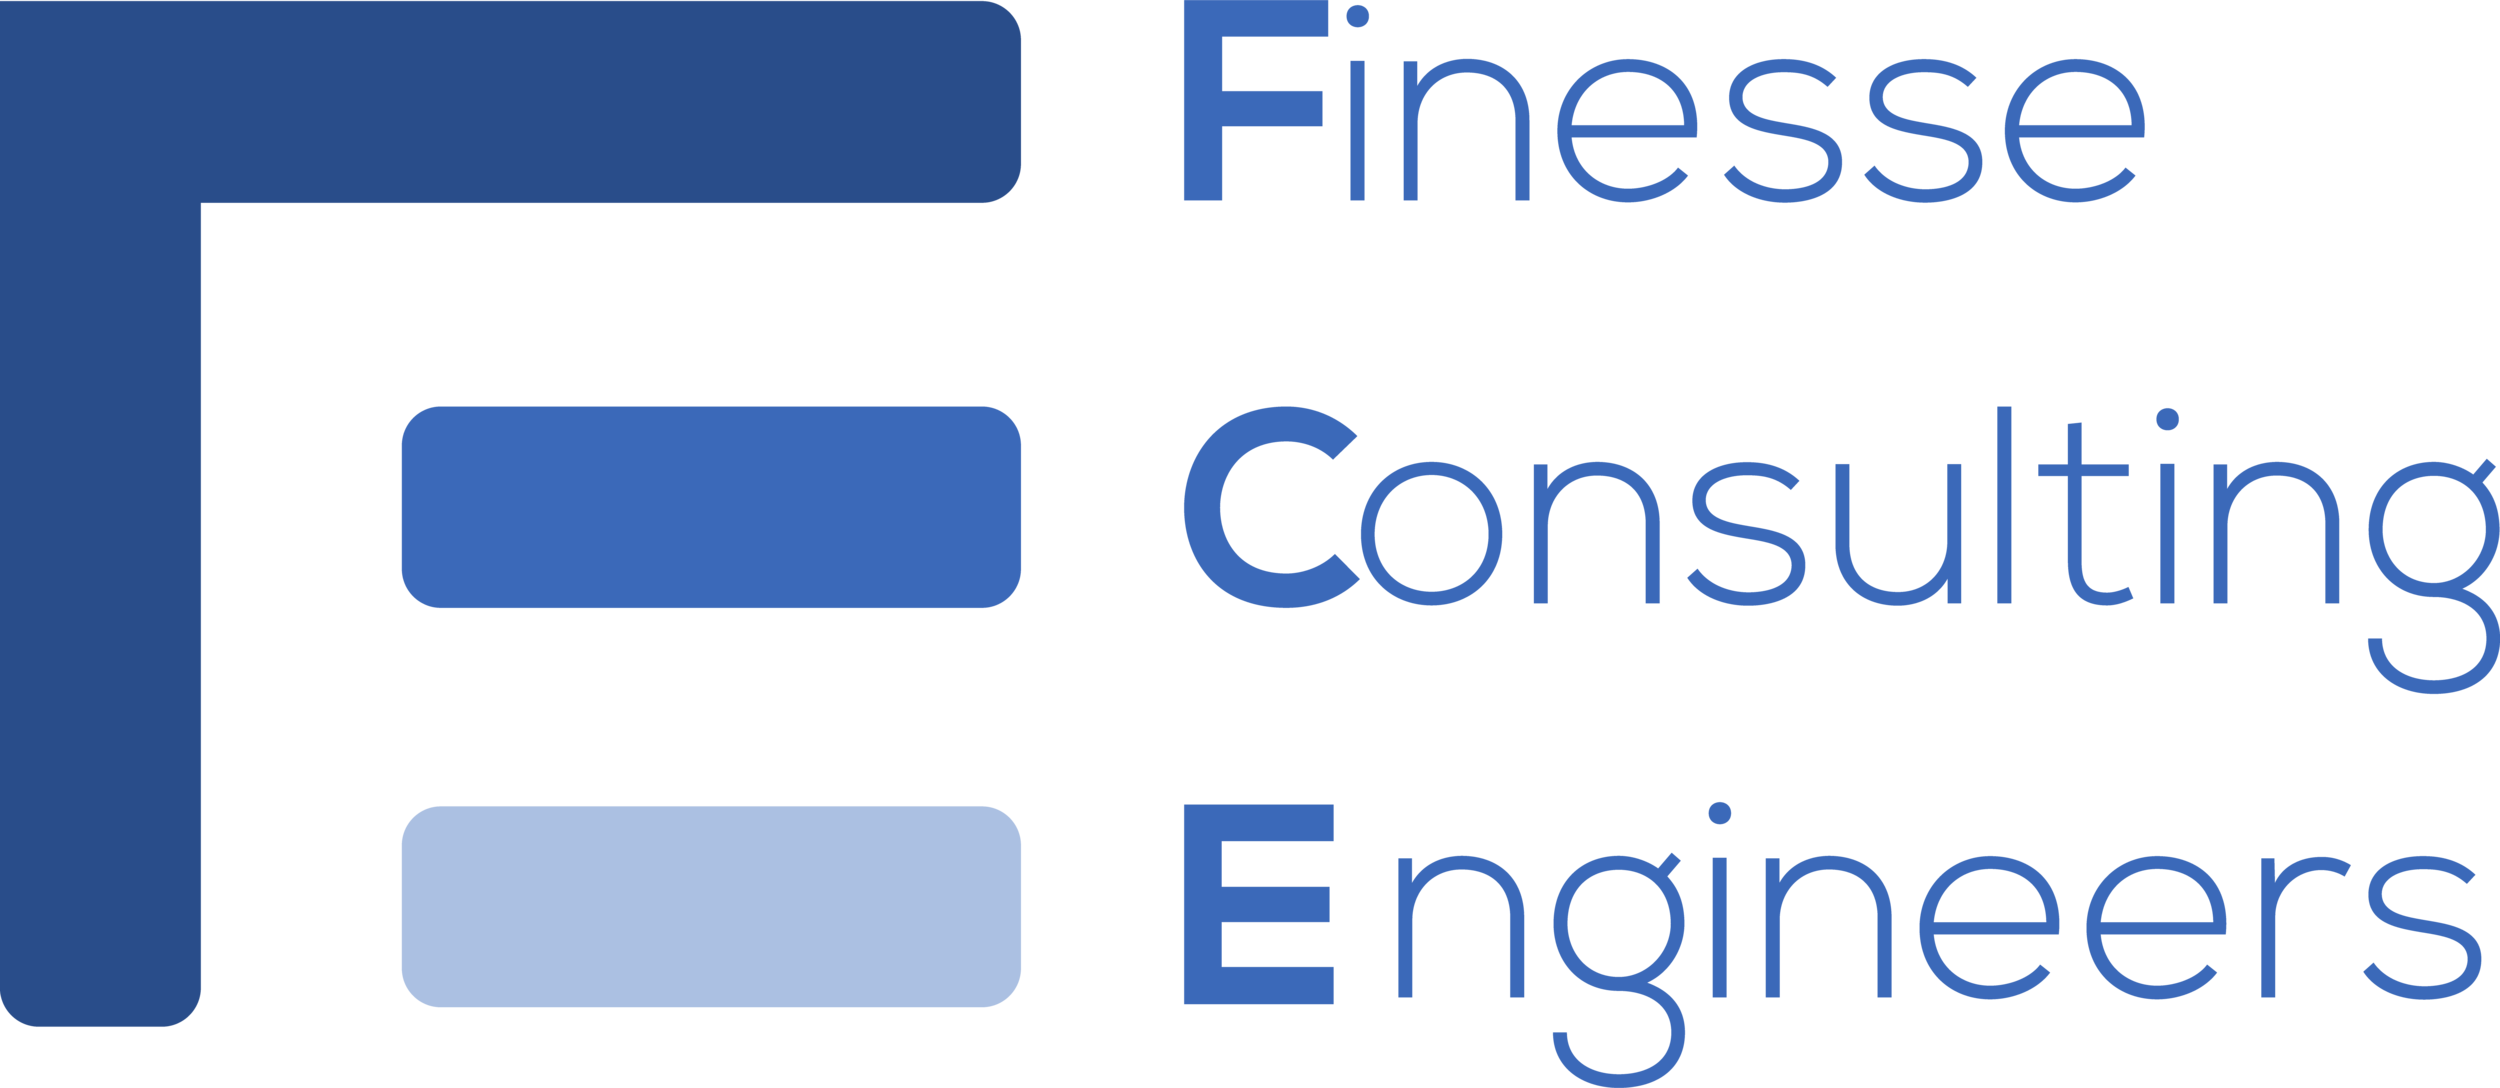 Finesse Consulting Engineers